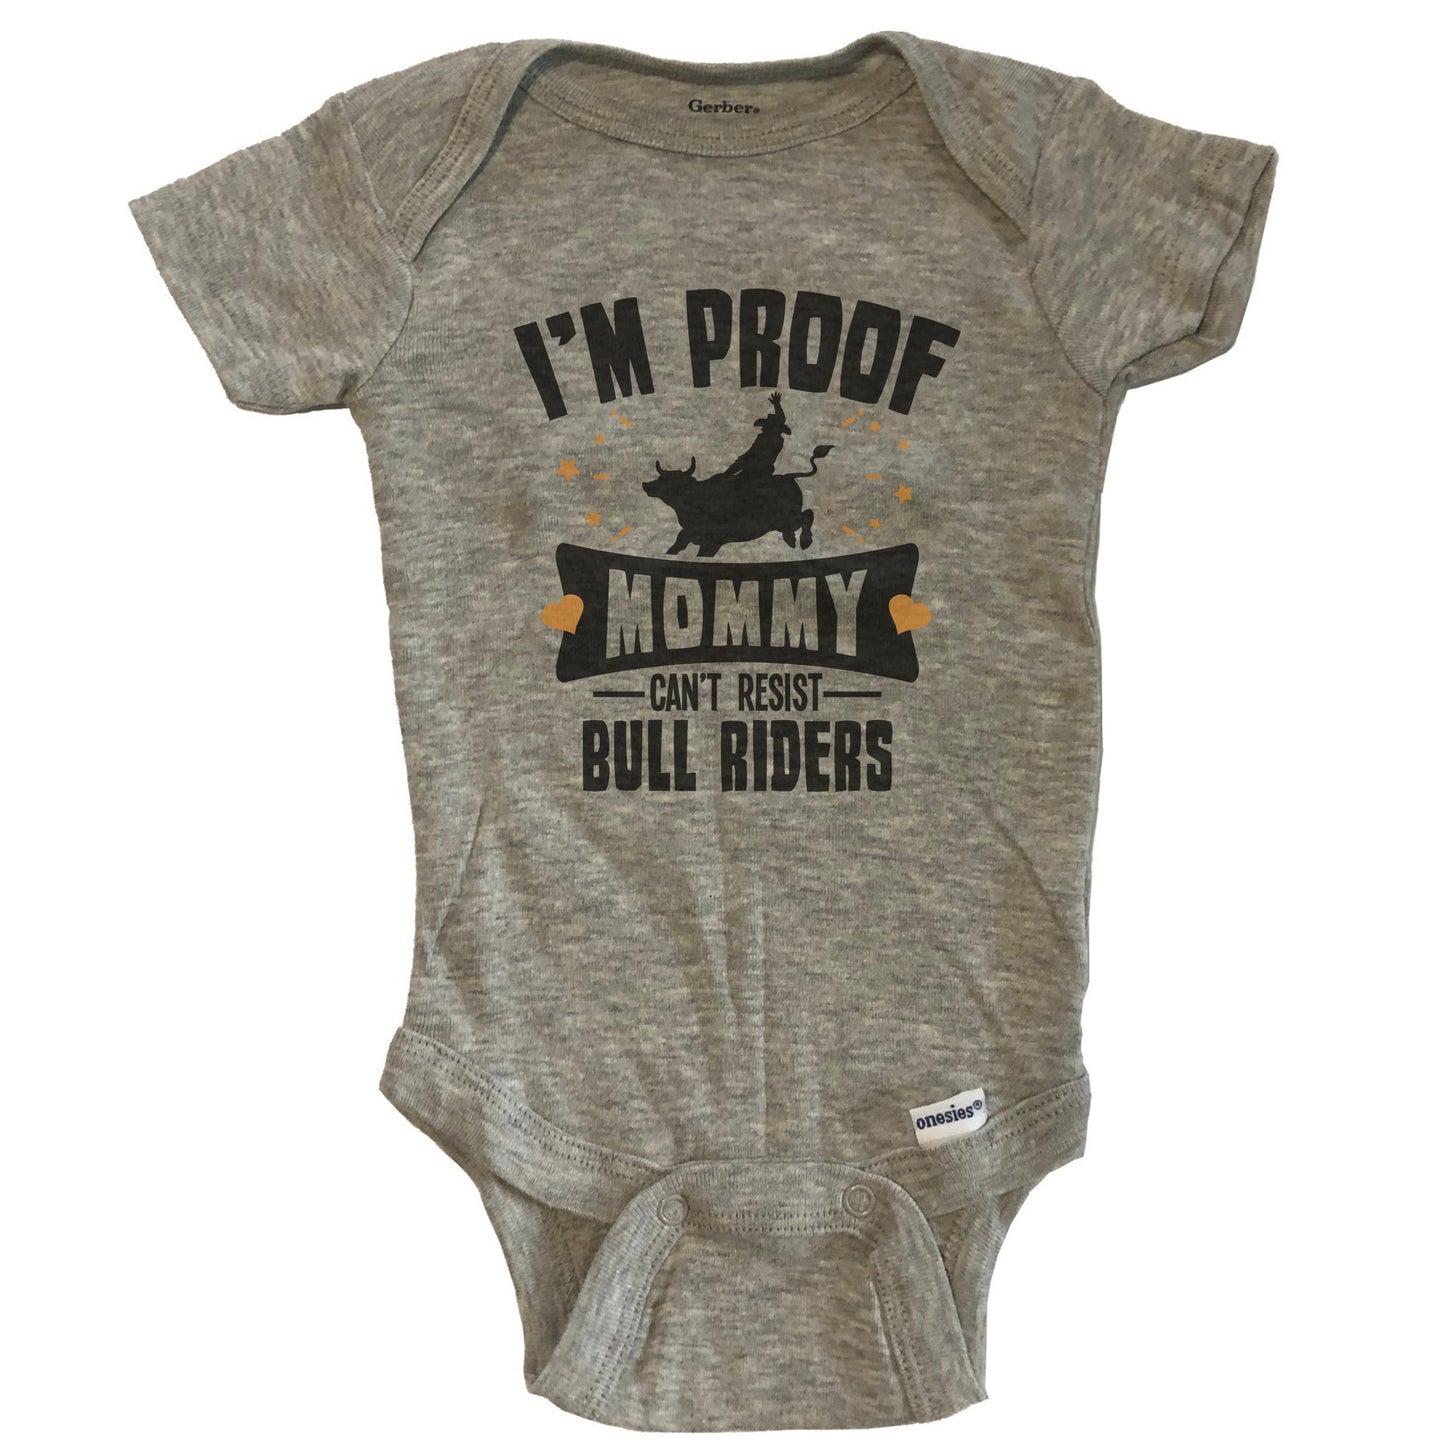 Funny Bull Riding Onesie - I'm Proof Mommy Can't Resist Bull Riders Baby Bodysuit